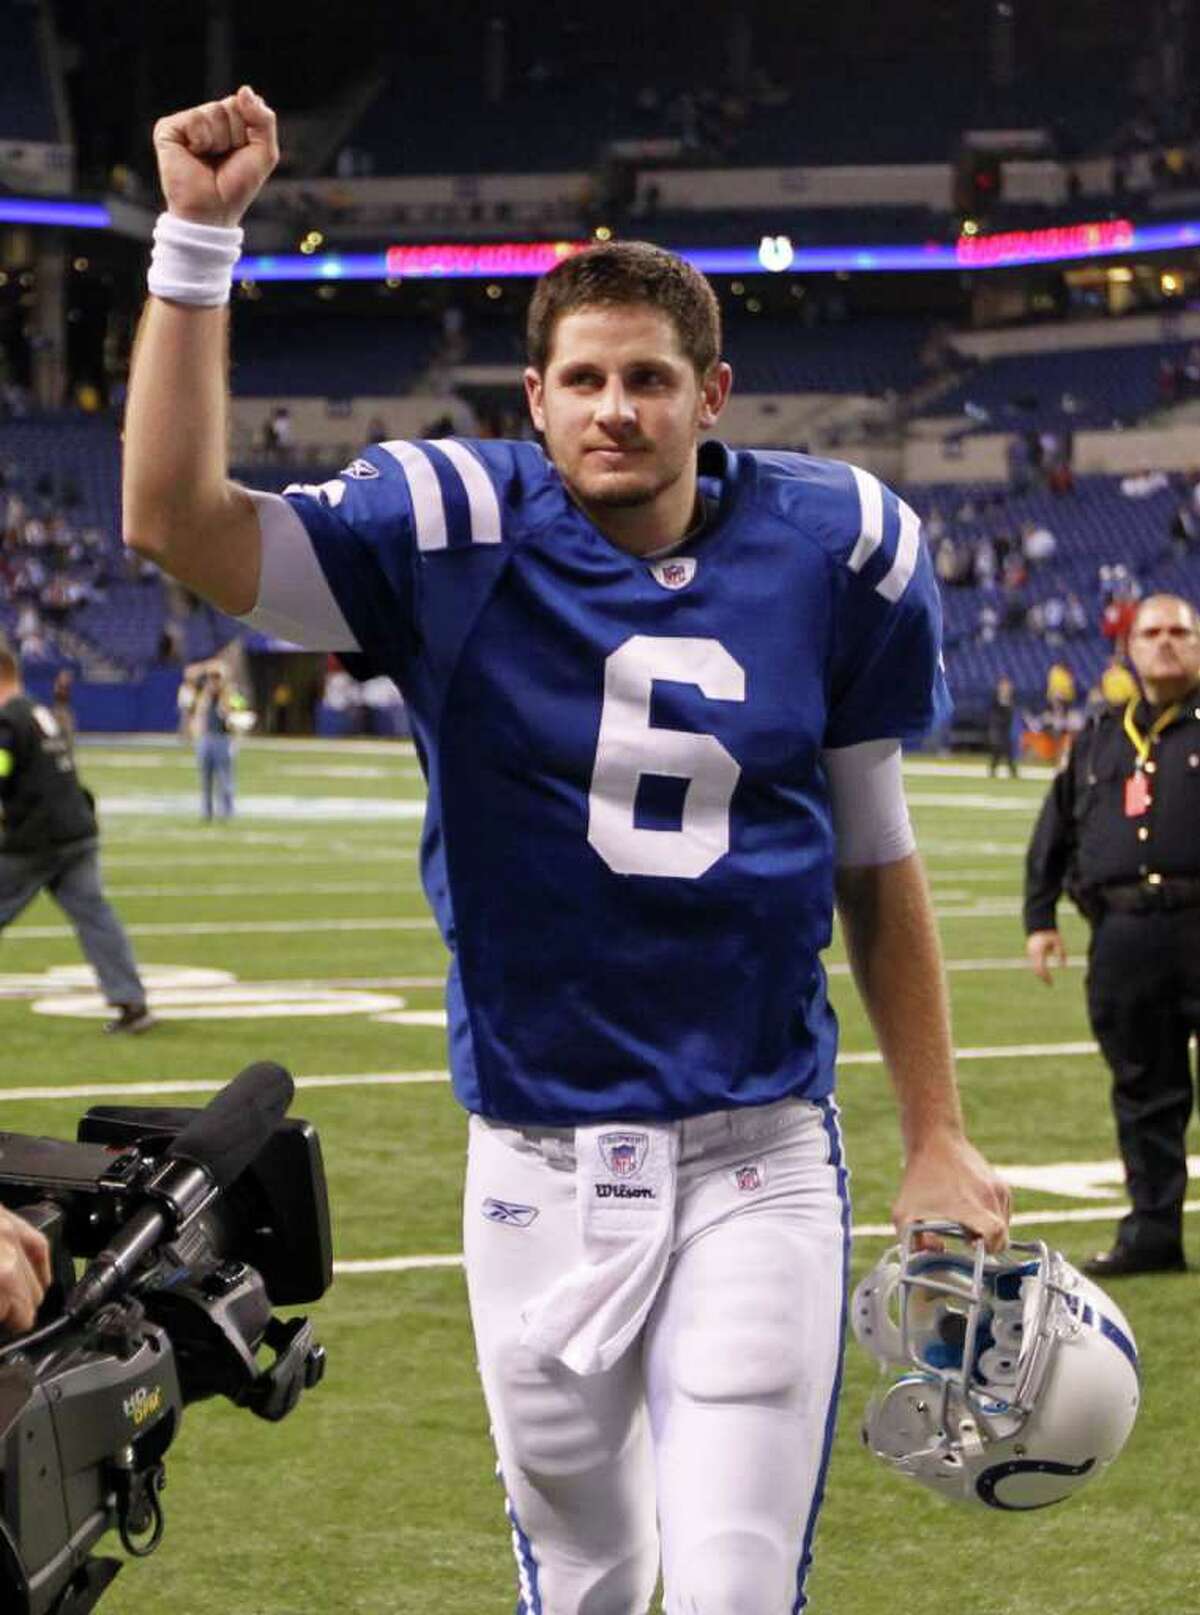 Indianapolis Colts quarterback Dan Orlovsky reacts as he runs off the field after the Colts defeated the Houston Texans 19-16 in an NFL football game, Thursday, Dec. 22, 2011, in Indianapolis.